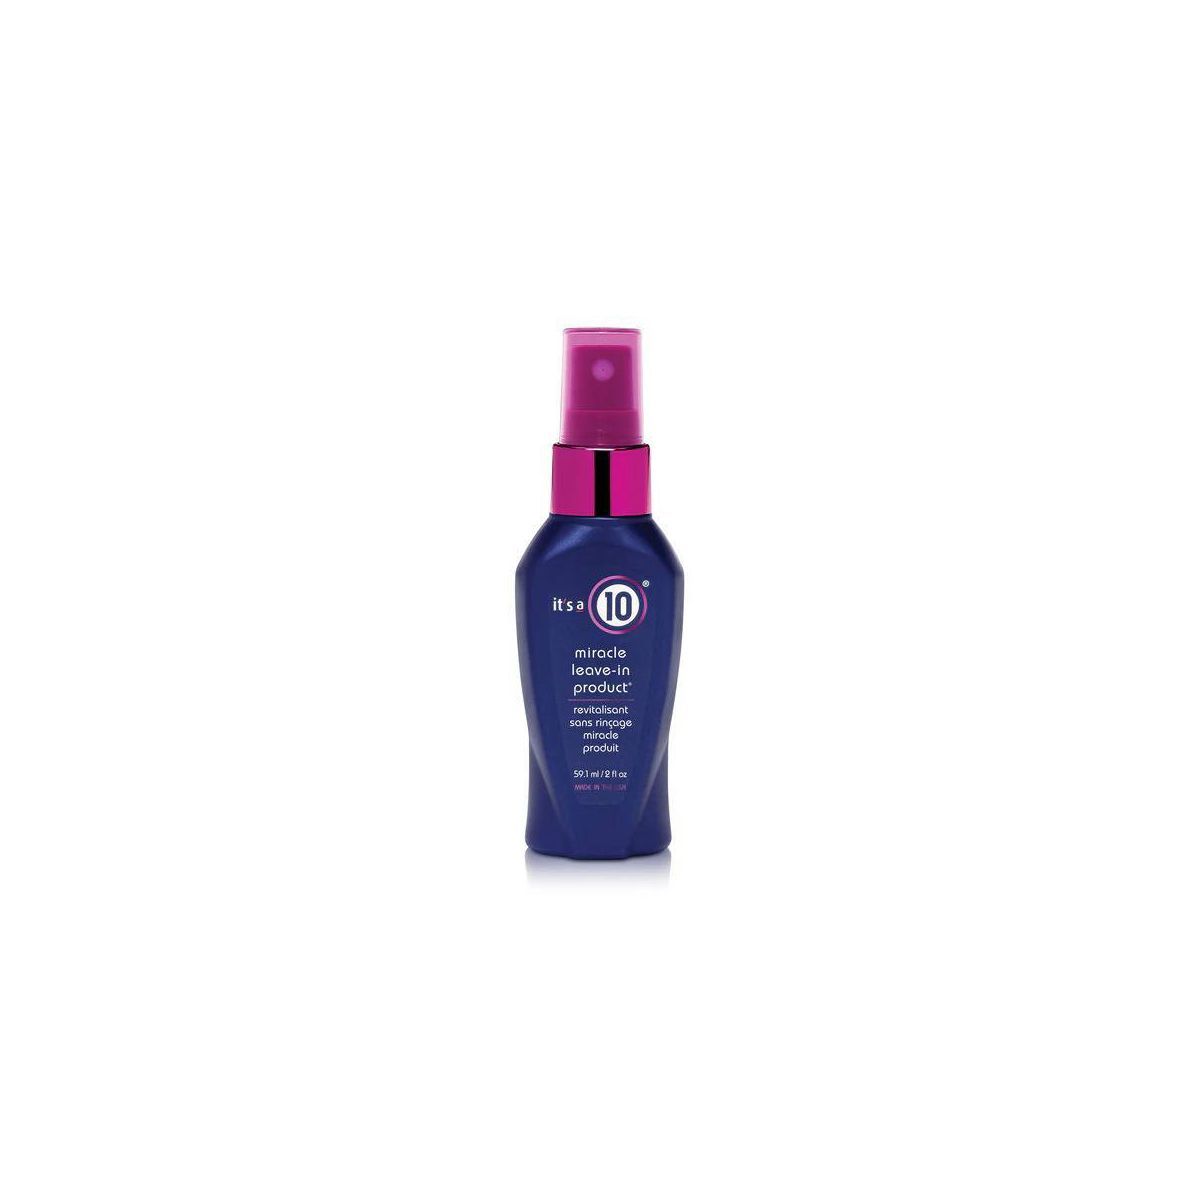 It's a 10 Miracle Leave-In Conditioner | Target